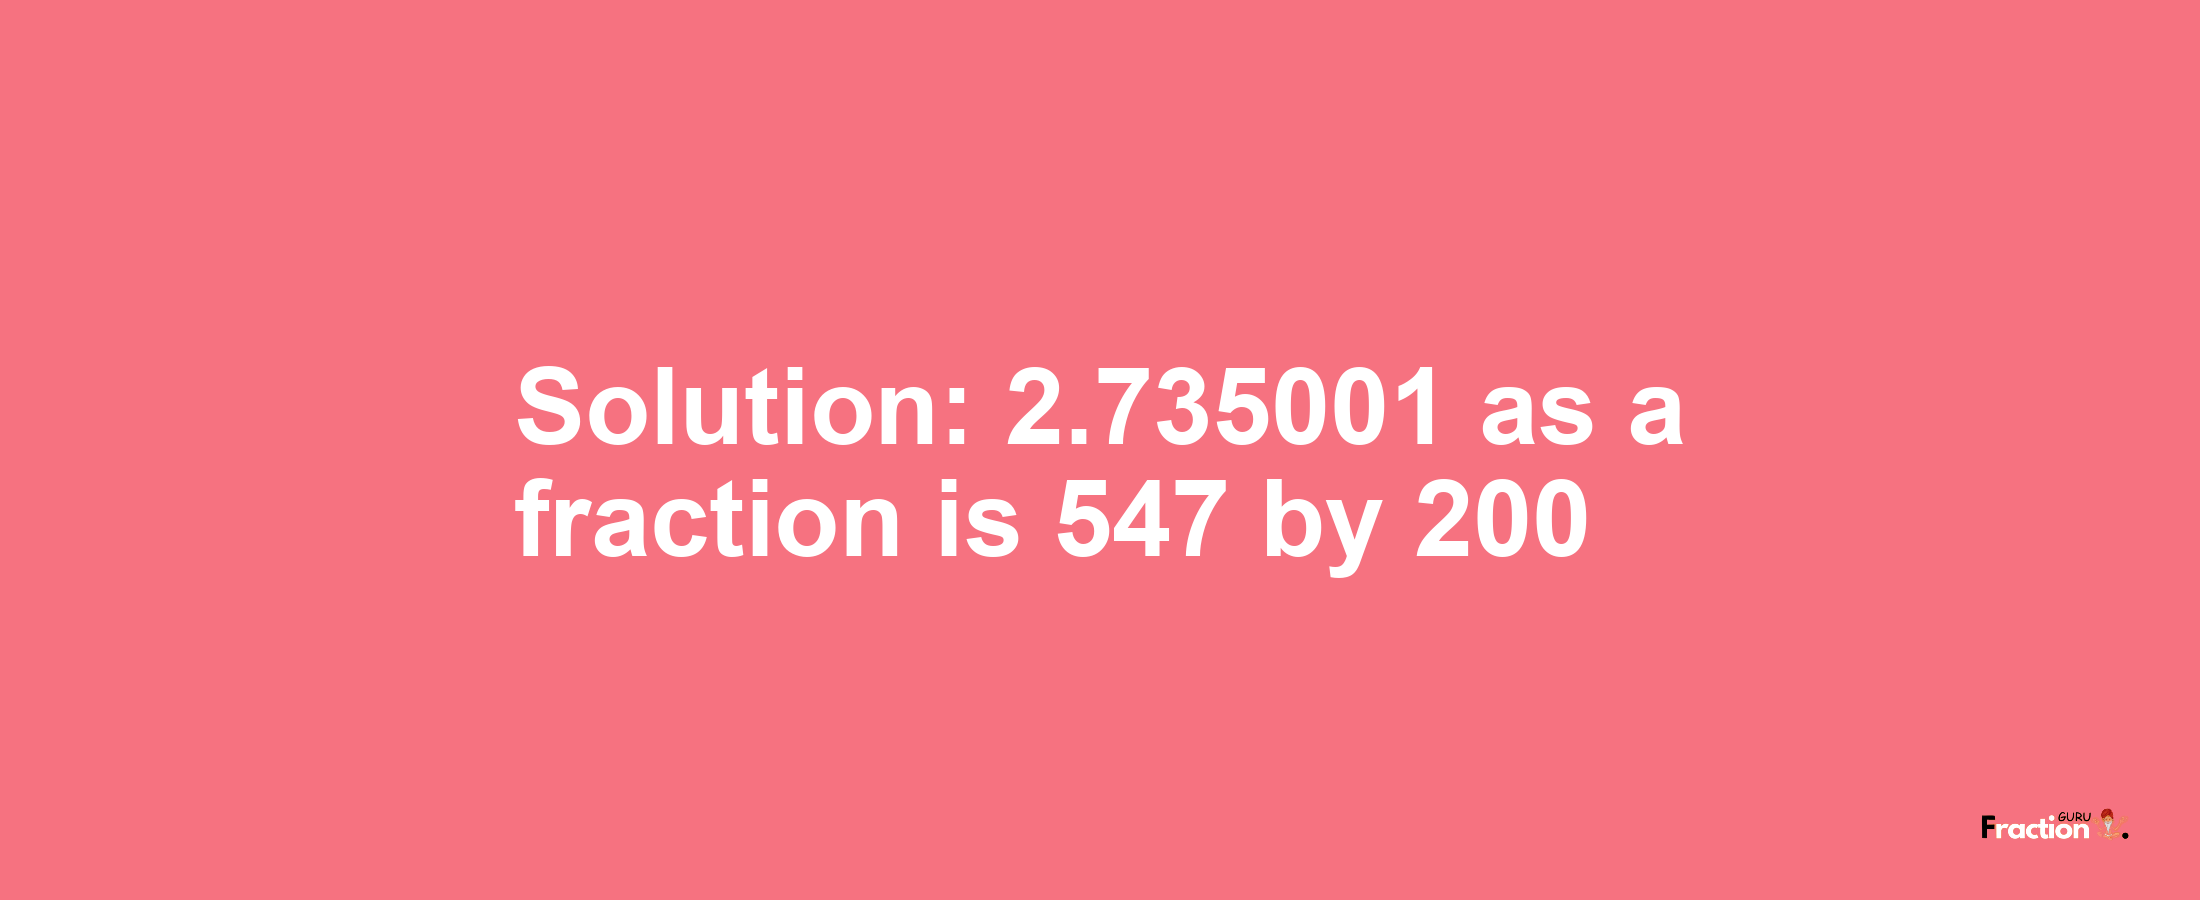 Solution:2.735001 as a fraction is 547/200